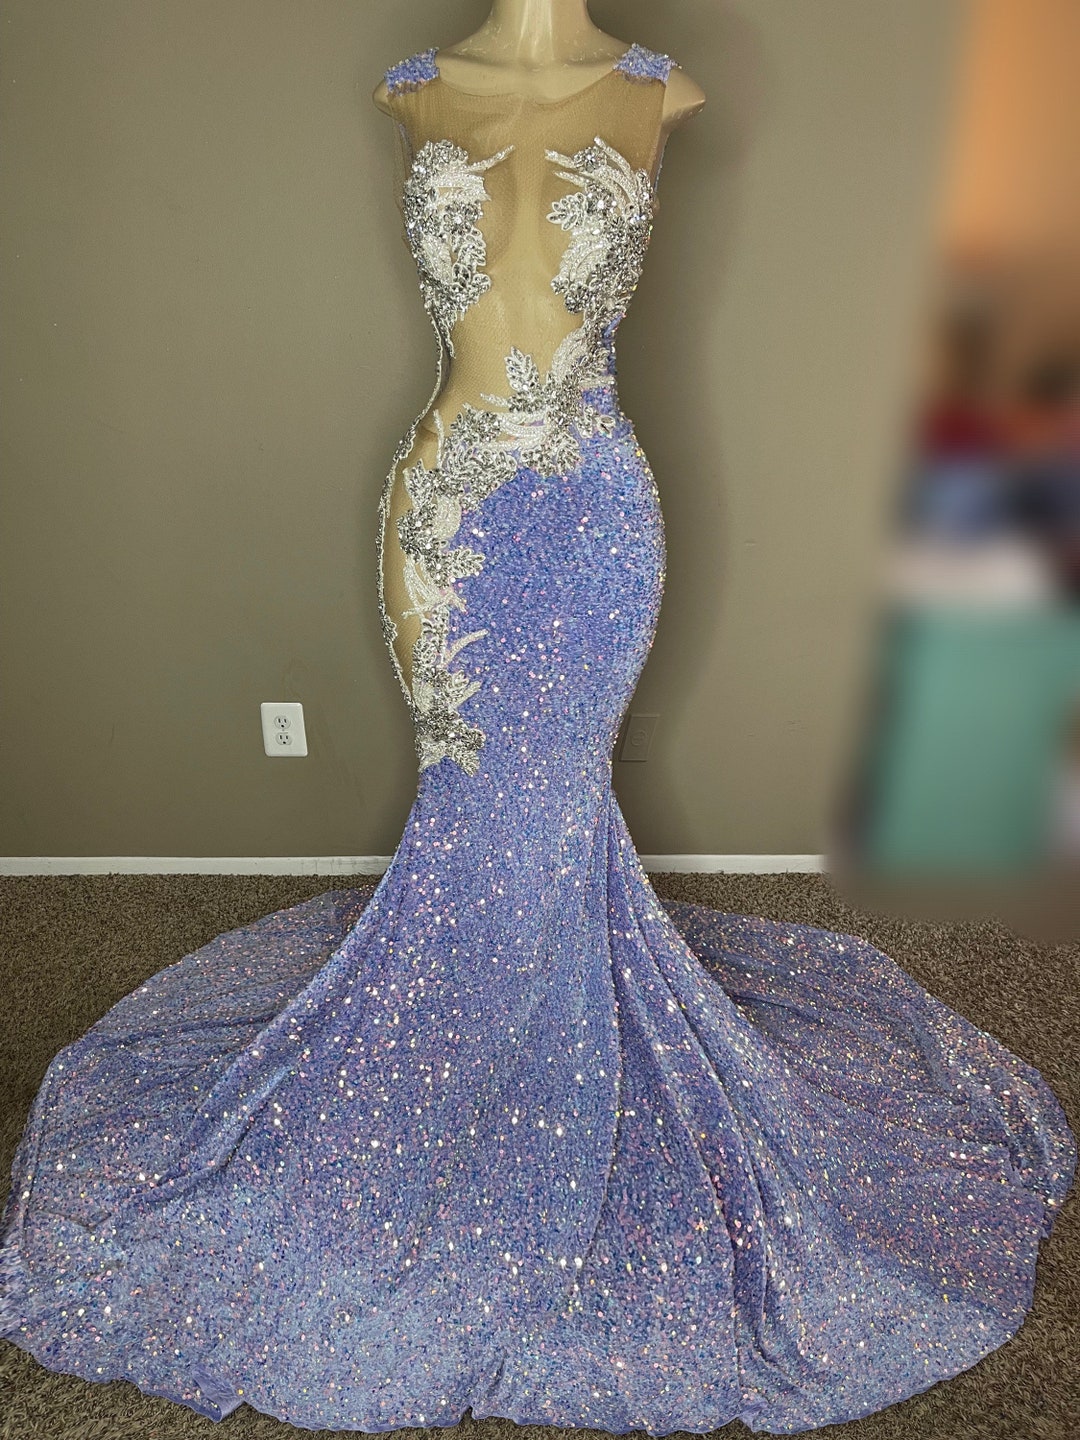 The Maddie Sequin Crystal Prom Dress - Etsy